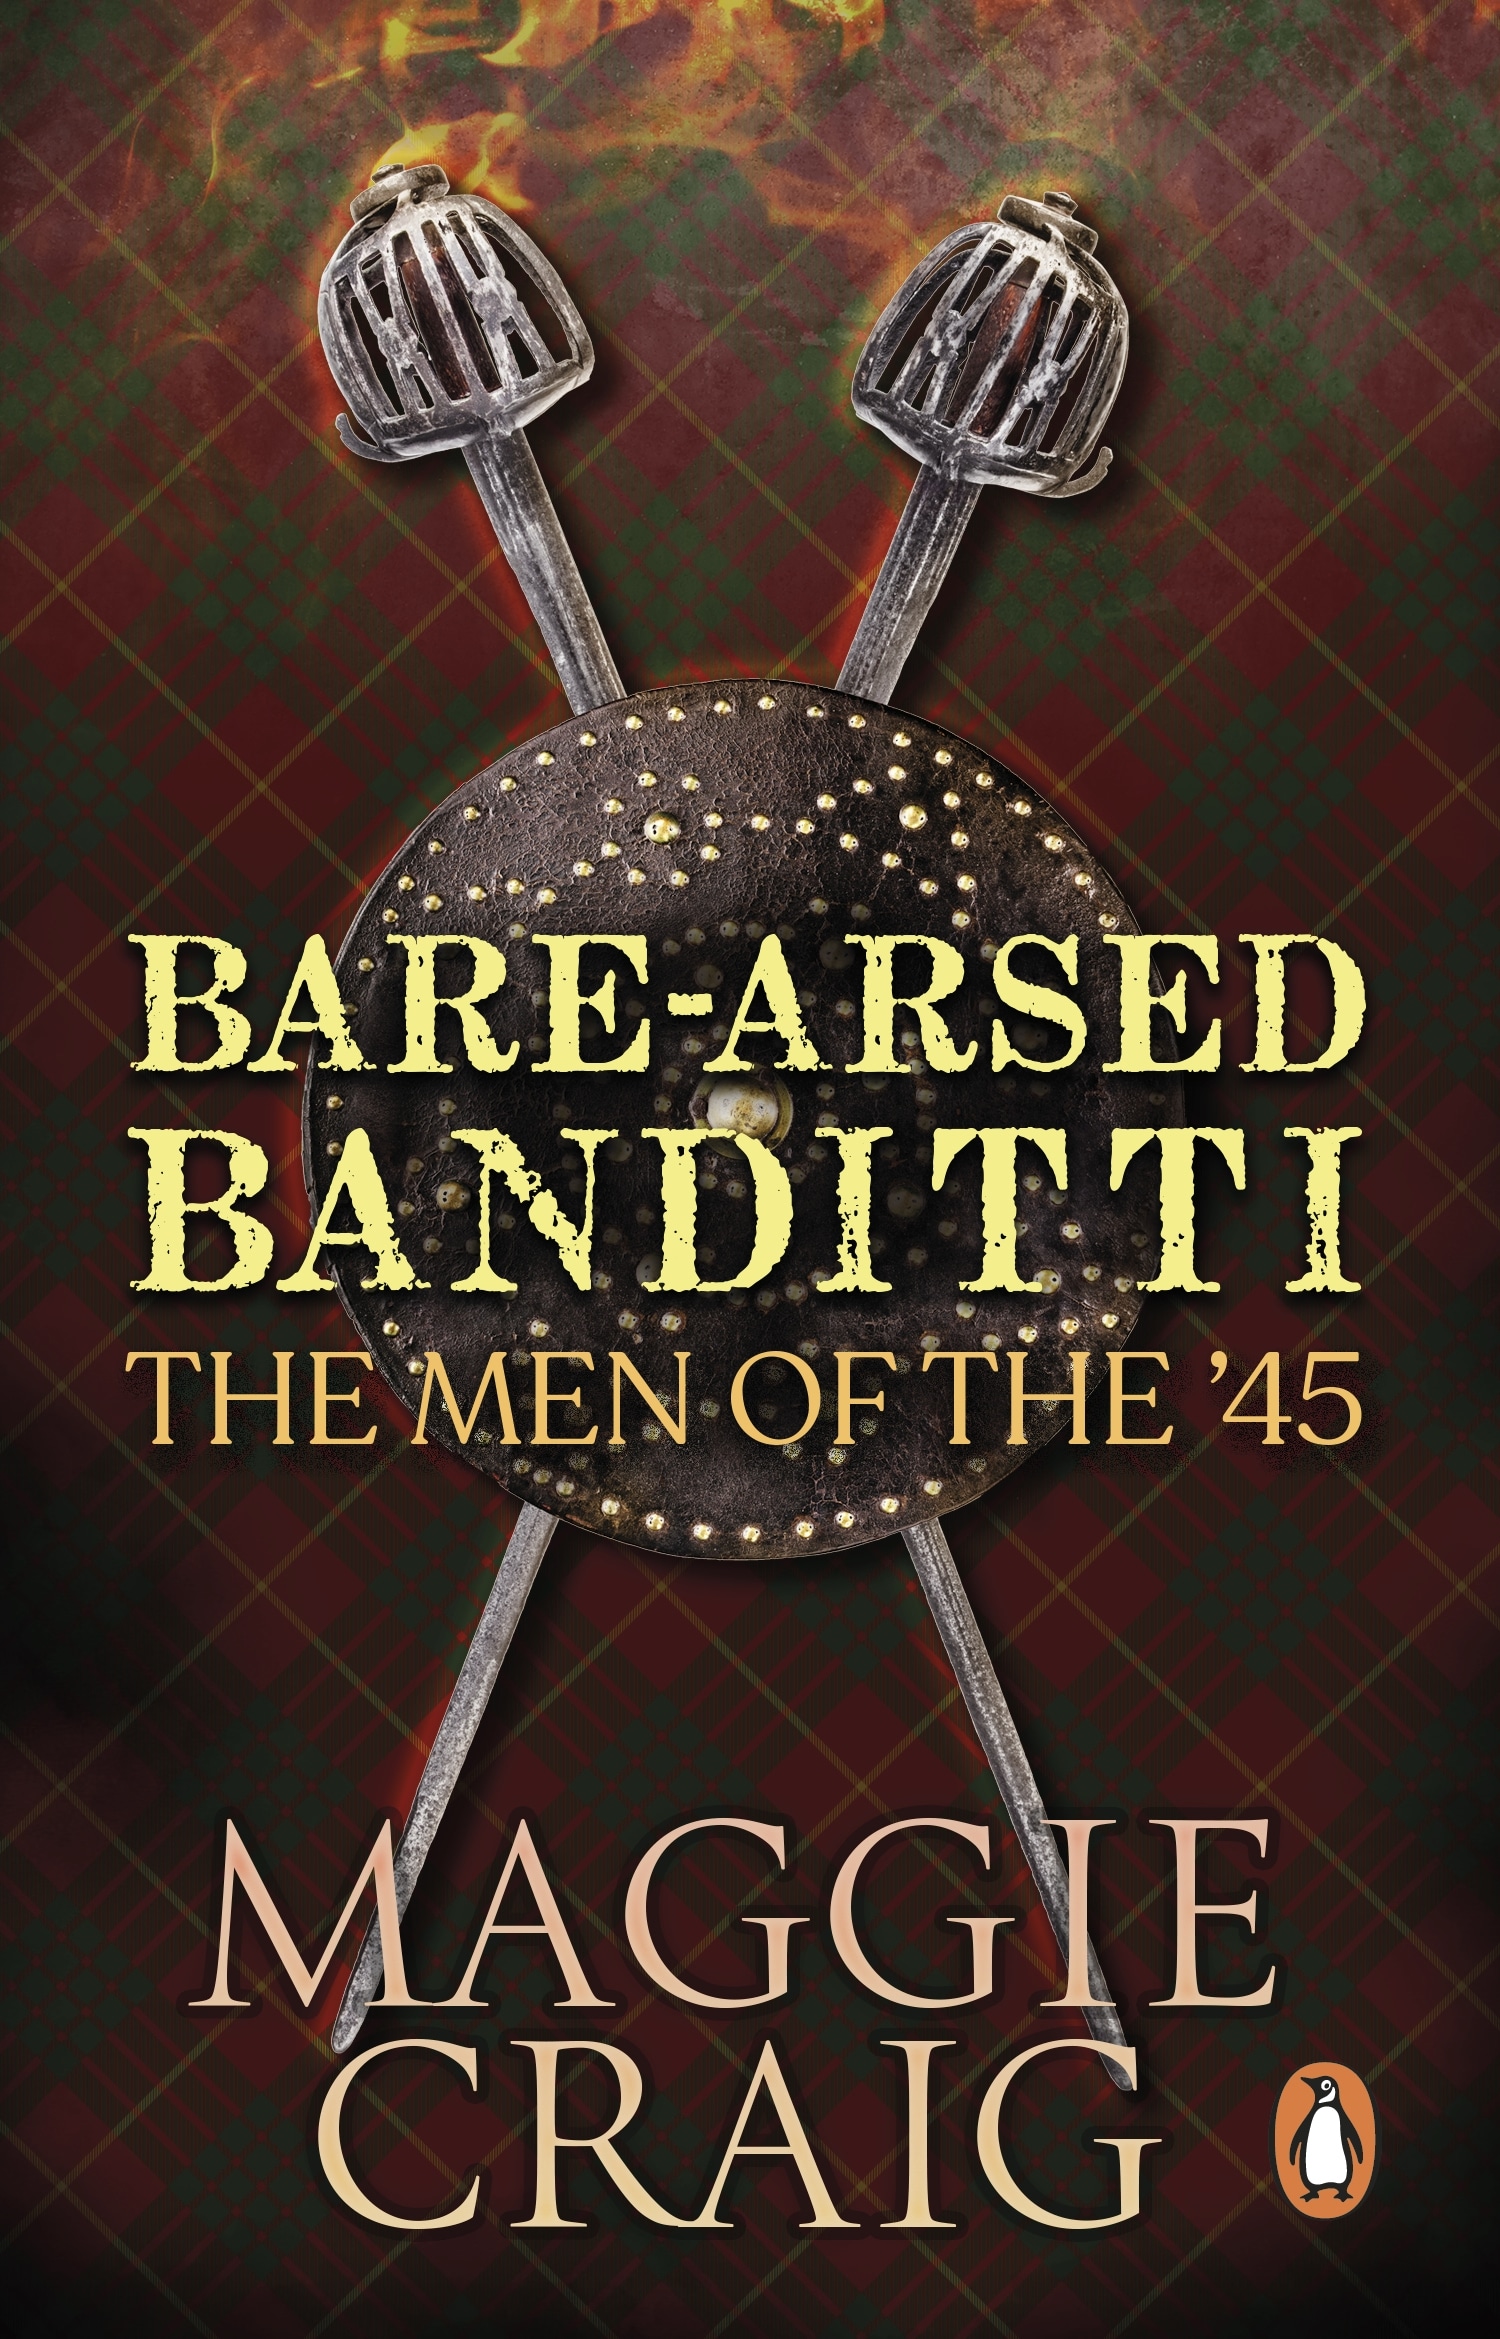 Book “Bare-Arsed Banditti” by Maggie Craig — March 10, 2022